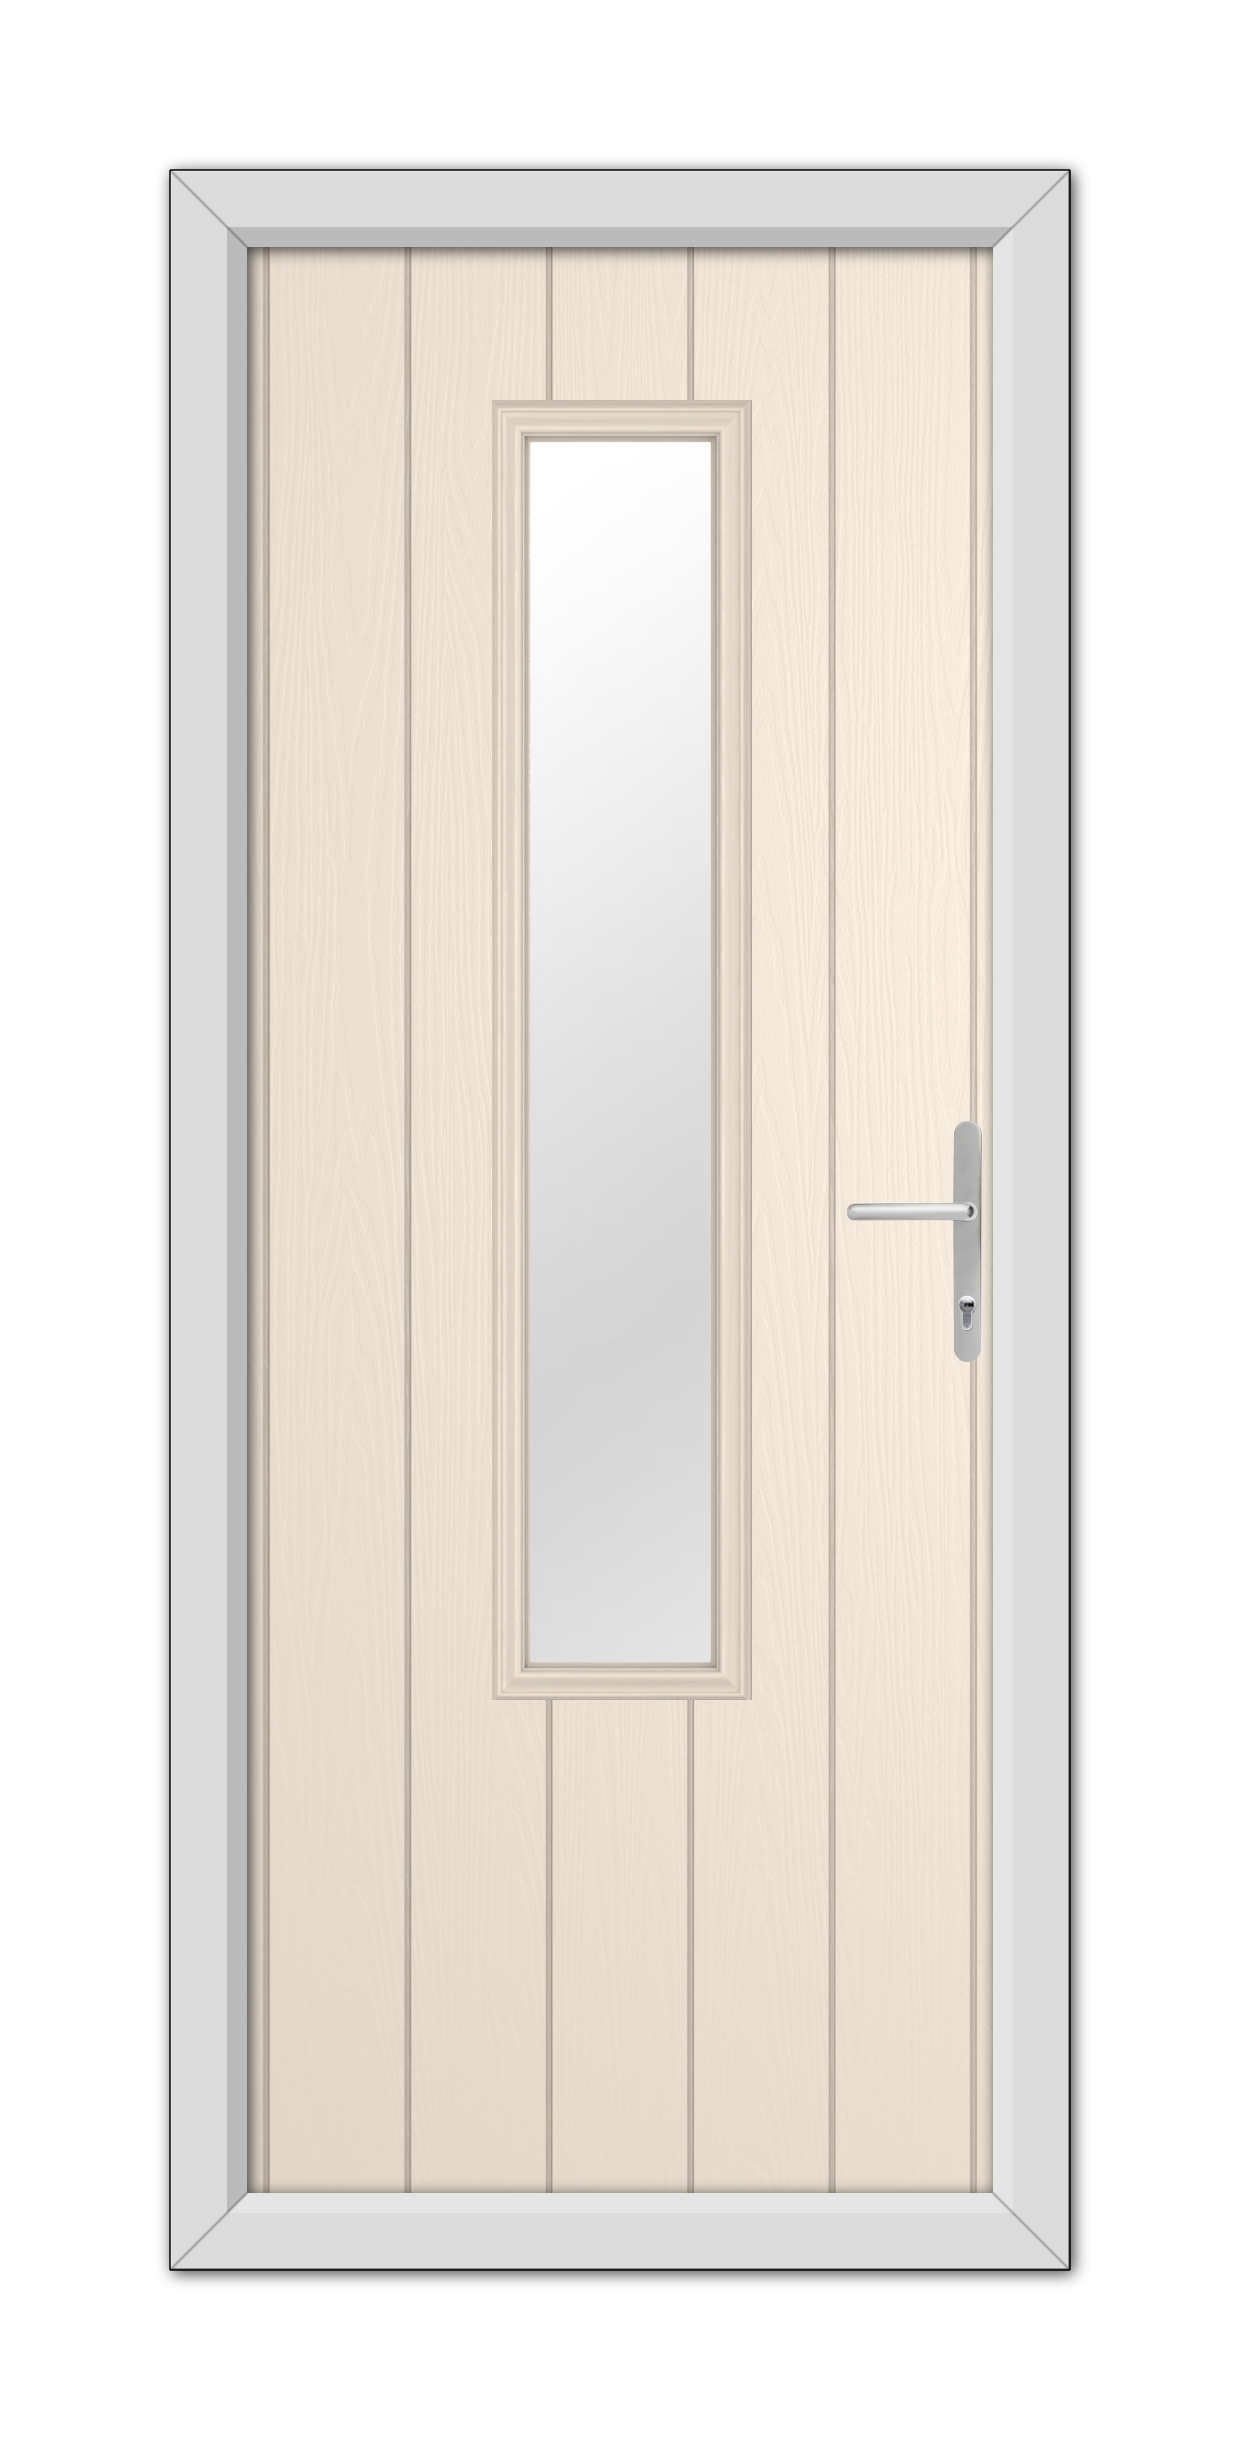 A Cream Abercorn Composite Door 48mm Timber Core with a vertical rectangular glass panel, framed by a gray door frame, and equipped with a silver handle on the right side.